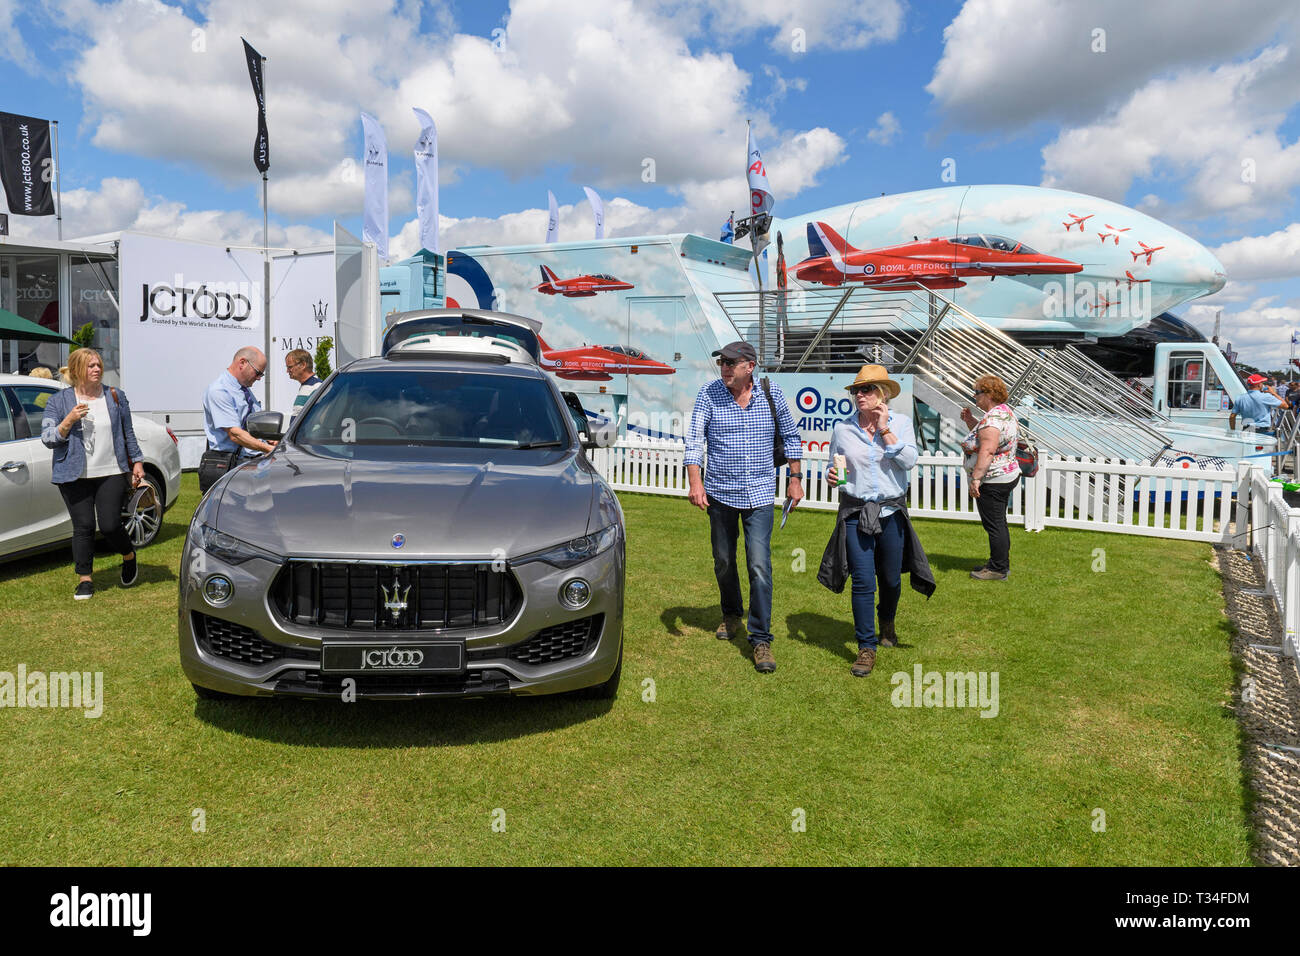 Sunny day out for people looking at grey Maserati Levante (luxury SUV car) parked on JCT600 trade stand - Great Yorkshire Show, Harrogate, England, UK Stock Photo